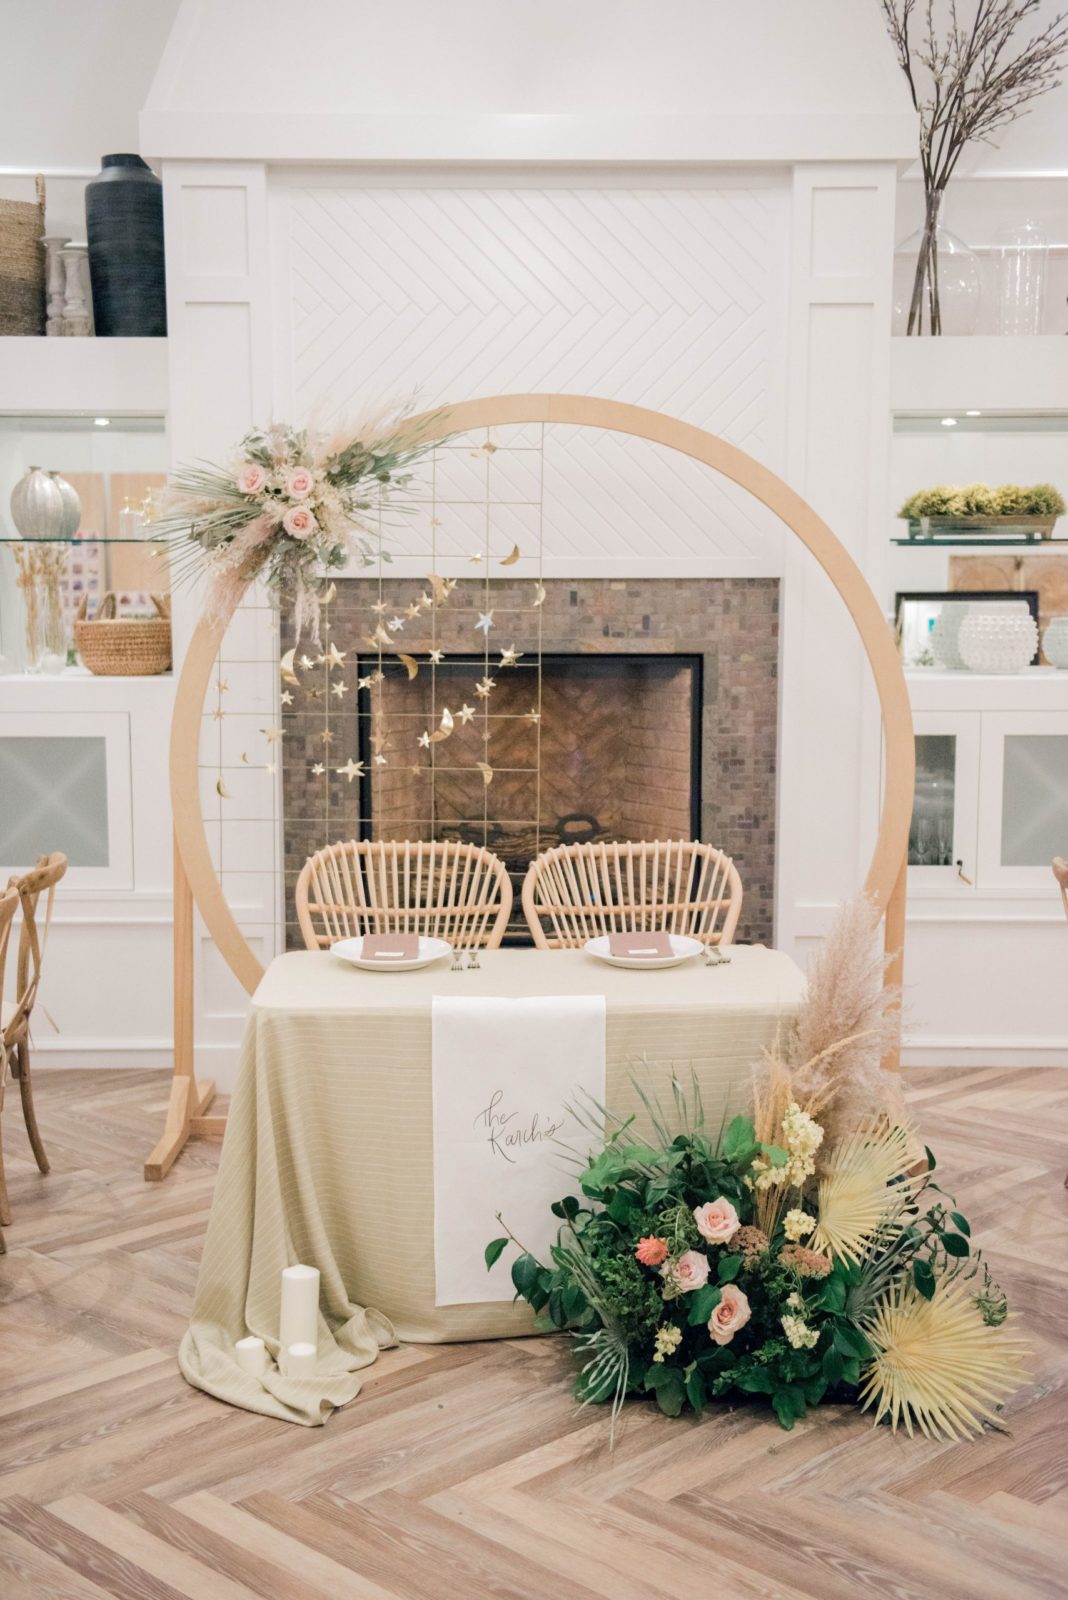 Tropical Meets Celestial in This Calgary Wedding Reception at Flores & Pine - featured on Bronte Bride